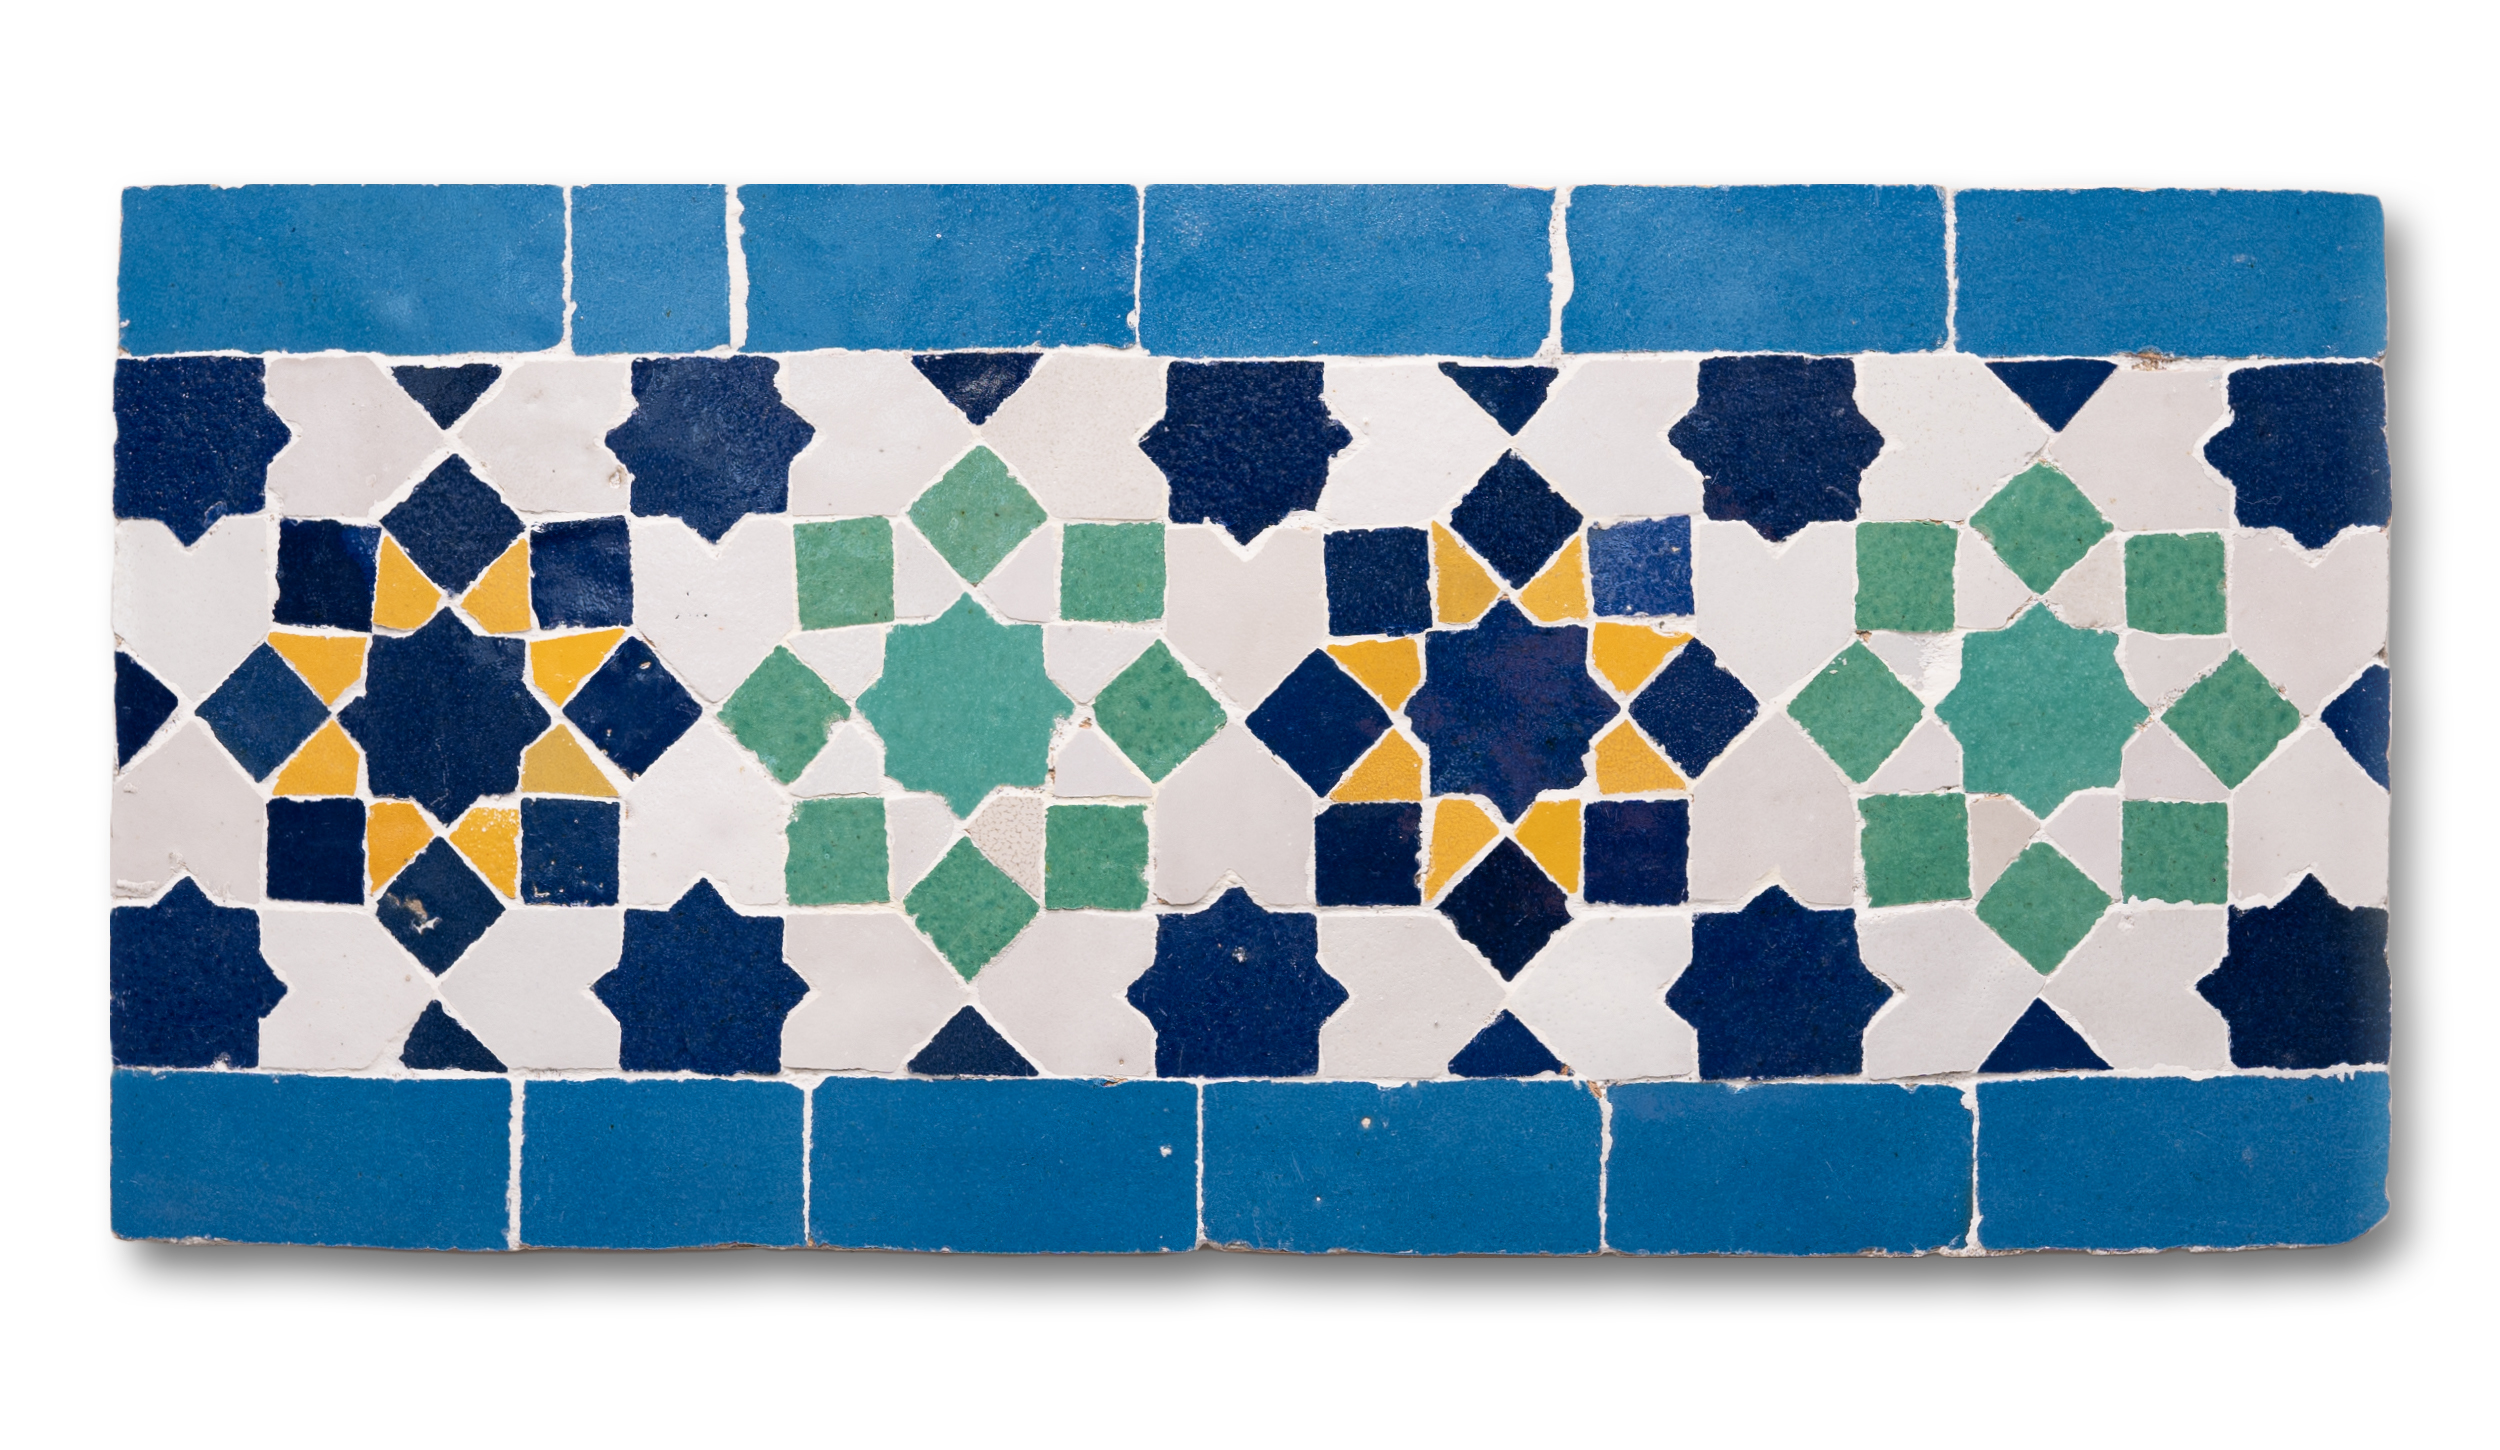 8x8 and White Gold Light Blue Moroccan Mosaic & Tile House CTP79-01 Mazagan Handmade Cement Tile